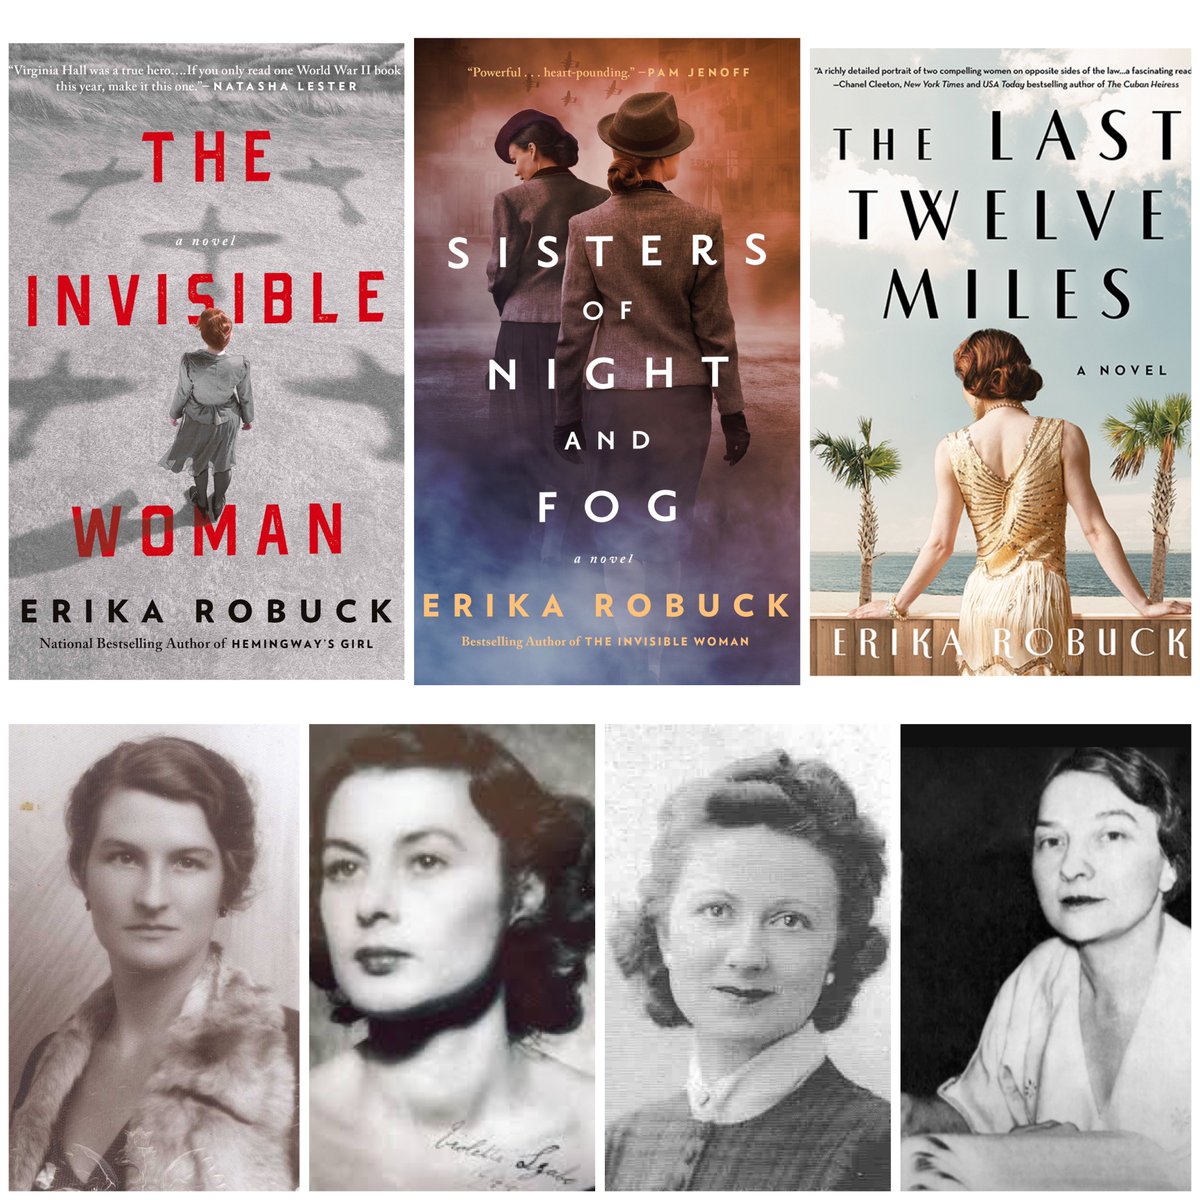 On International Women's Day I honor the women protagonists of my novels. Their bravery and intelligence inspire me. 💪Virginia Hall | THE INVISIBLE WOMAN 💜Violette Szabo & Virginia d'Albert-Lake | SISTERS OF NIGHT & FOG ✍️Elizebeth Smith Friedman | THE LAST TWELVE MILES